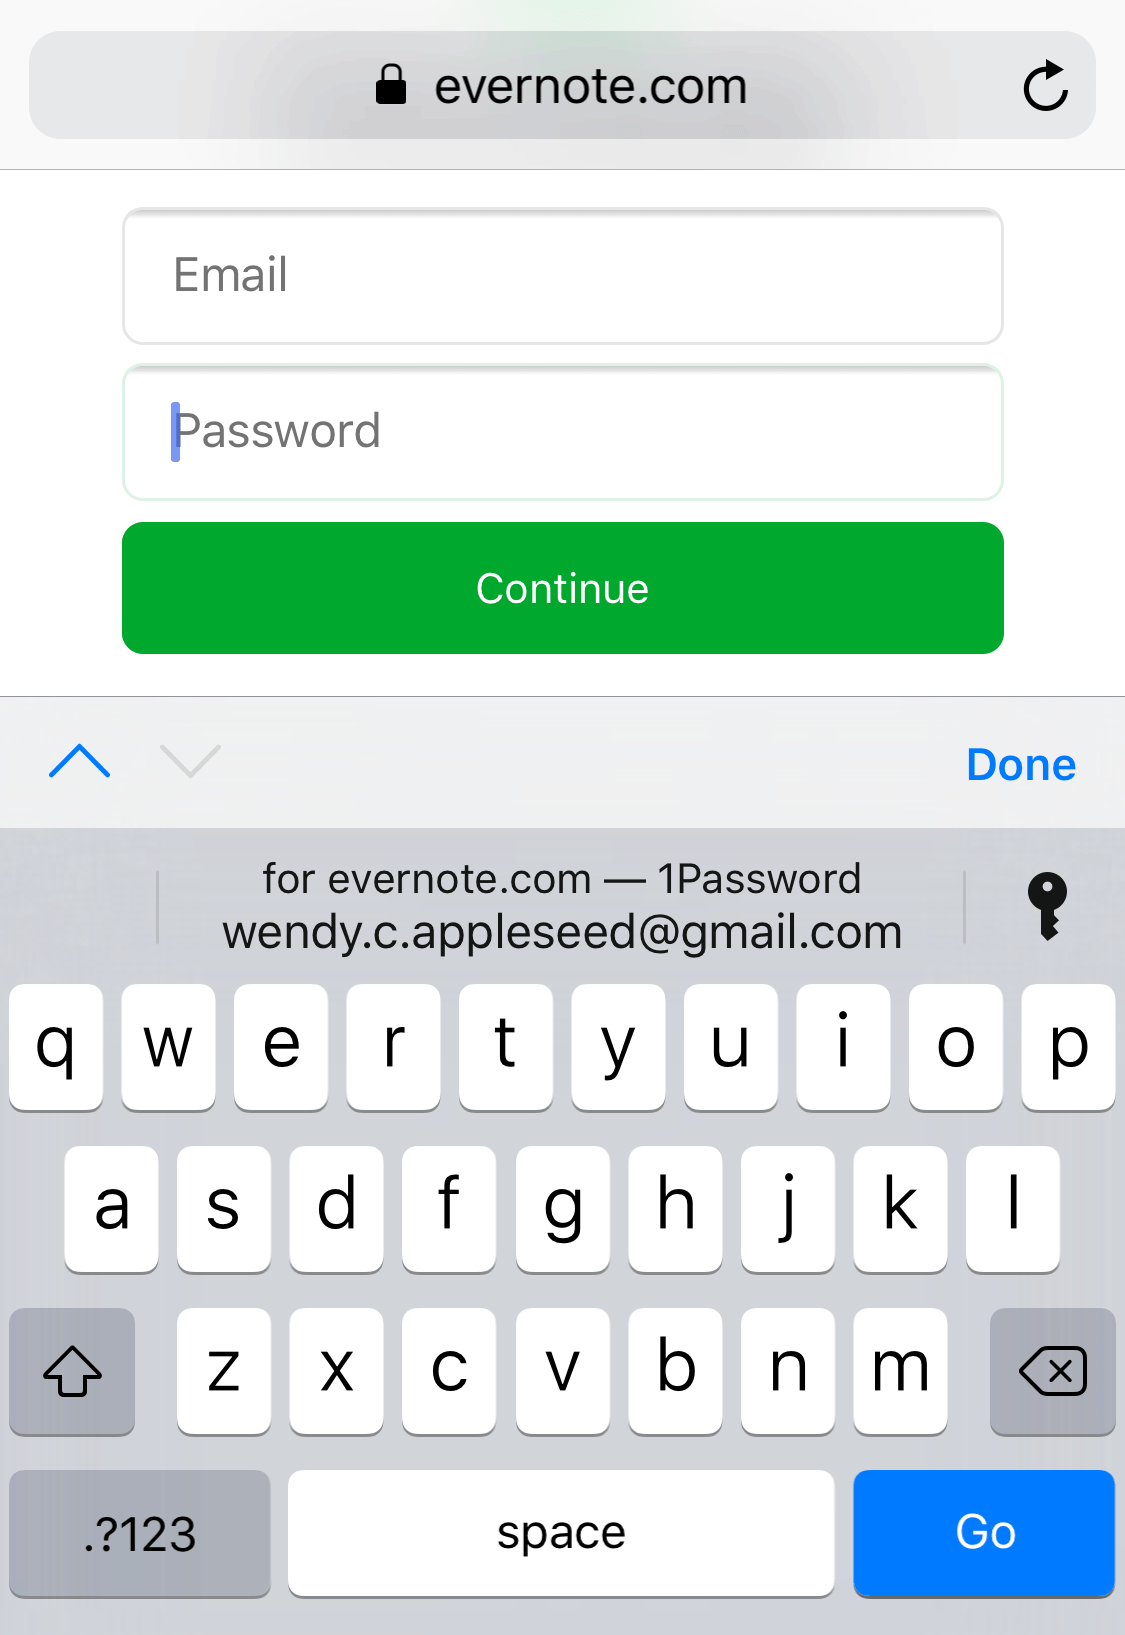 Image showing form fields being filled on evernote.com using iOS keyboard with 1password autofill